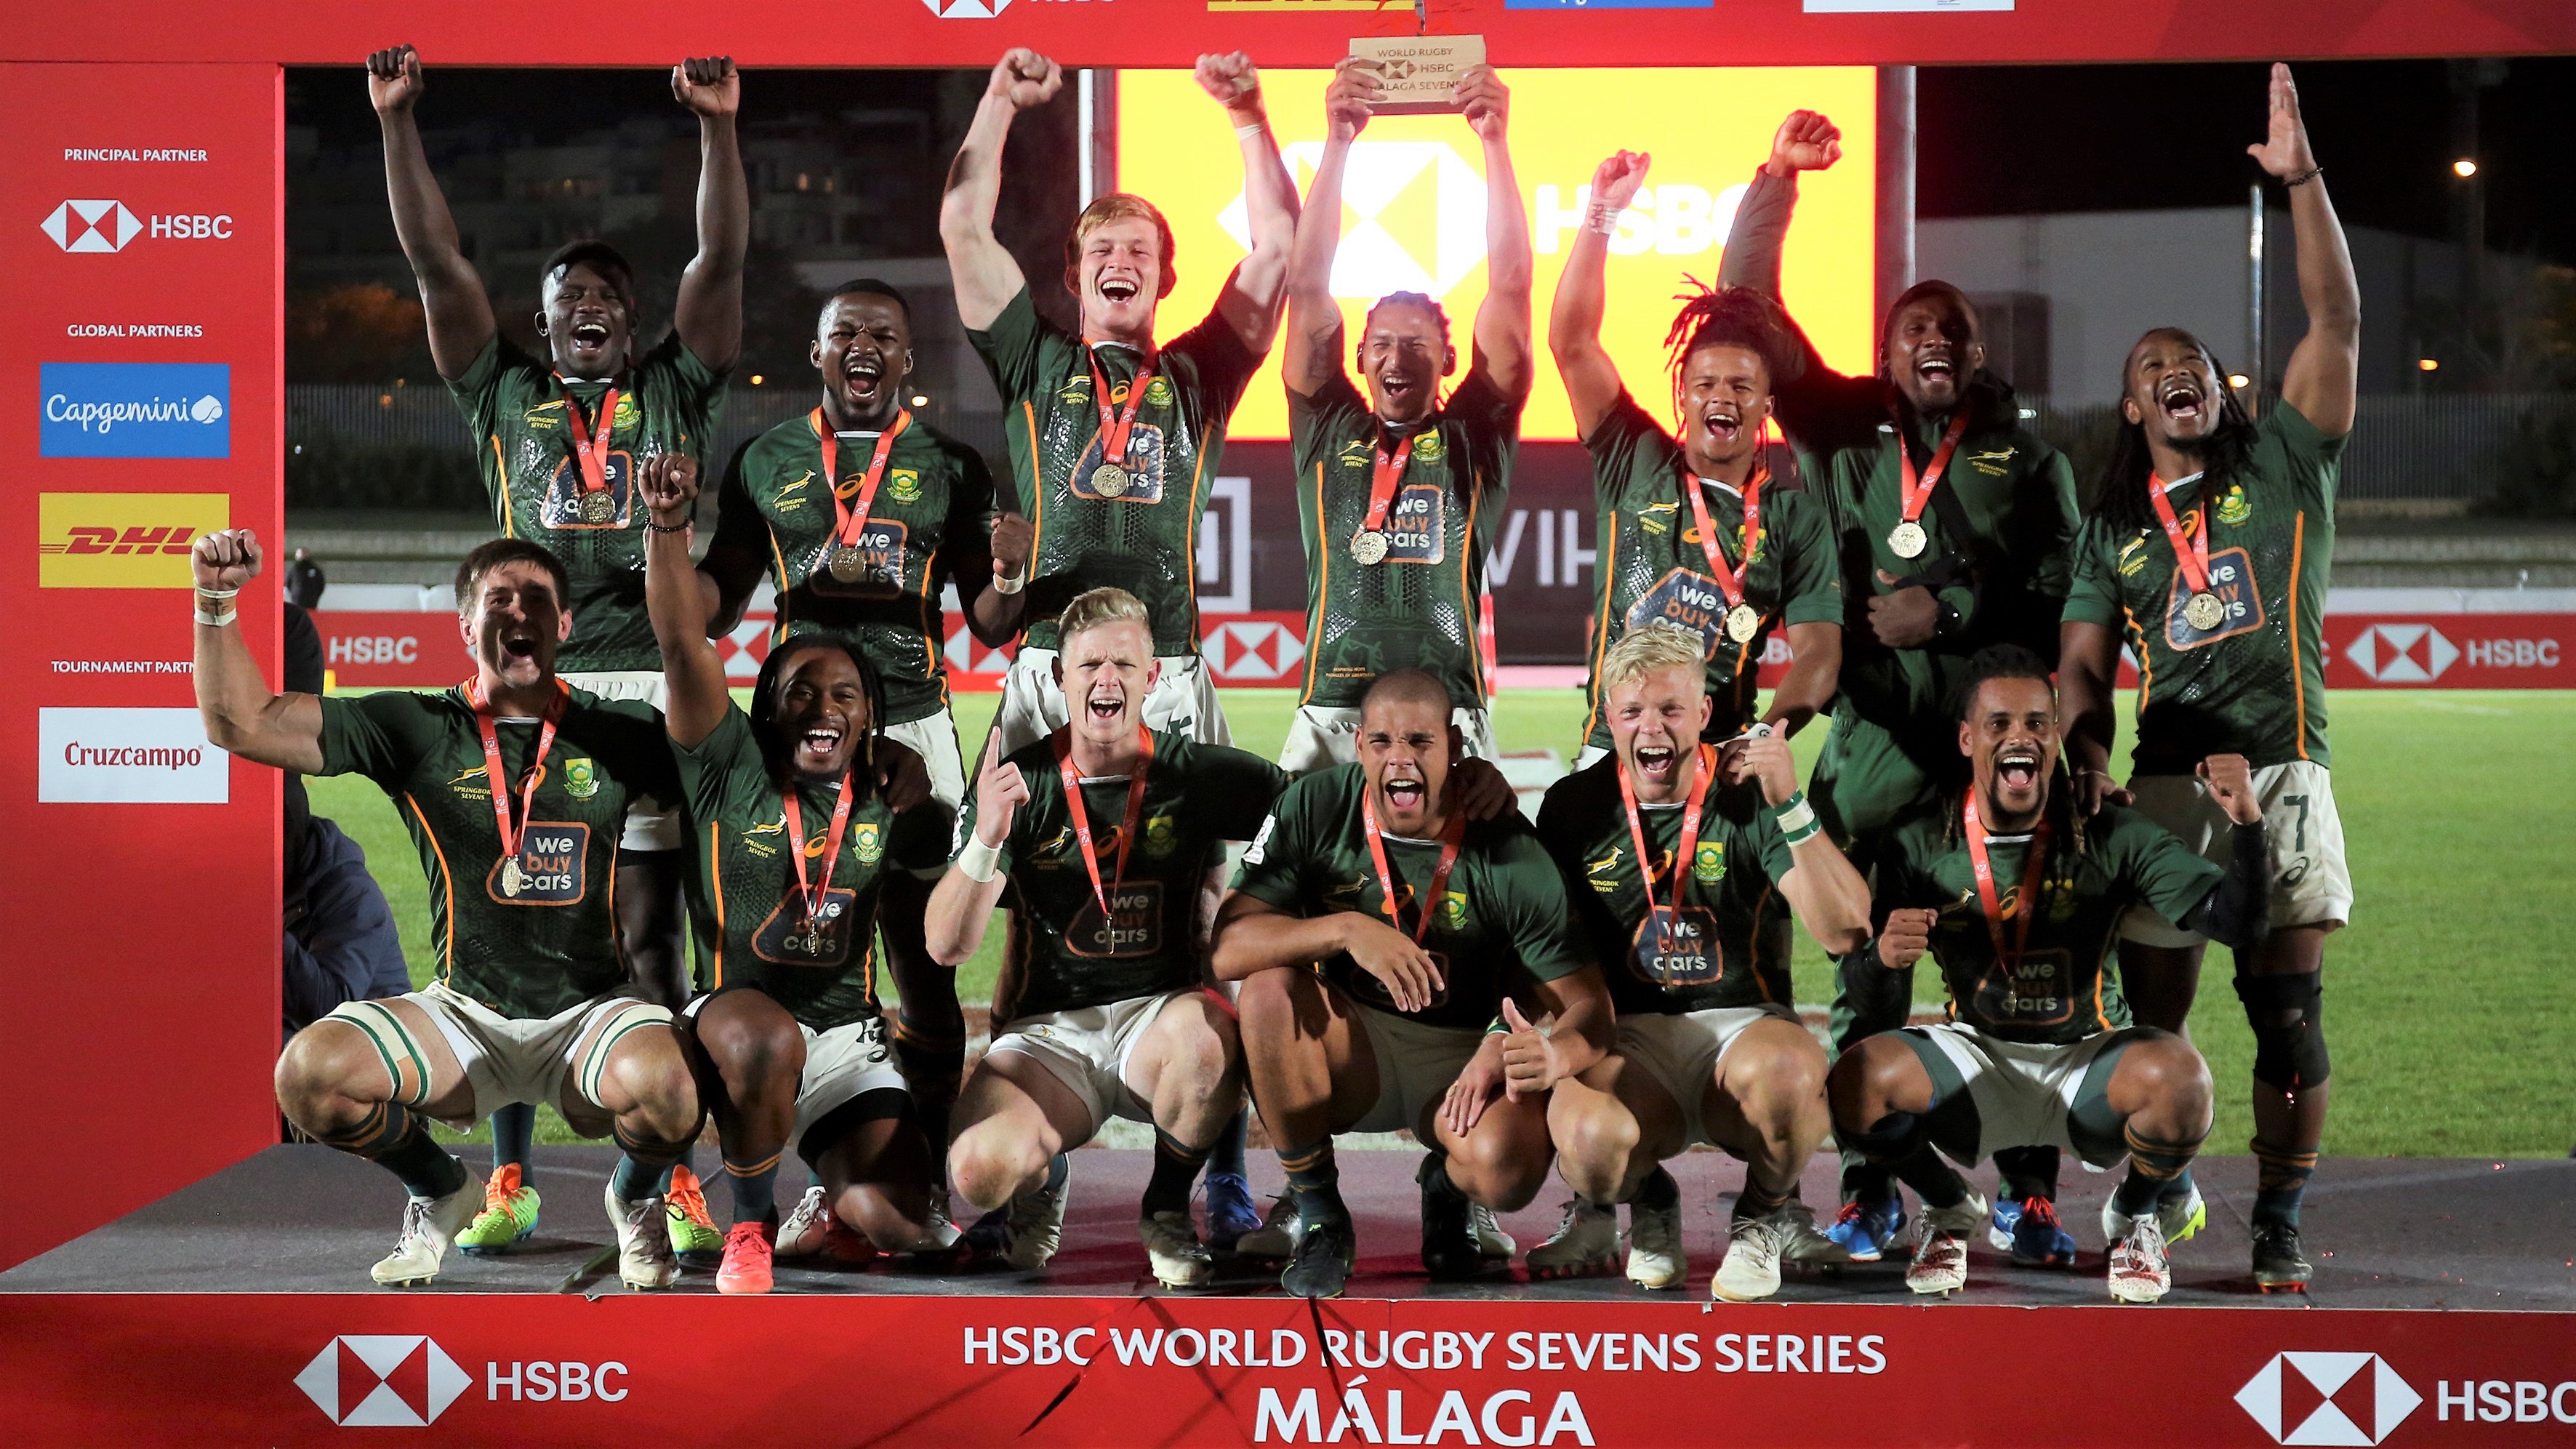 epa09705417 South African players celebrate their gold medal following their victory against Argentina on their at the HSBC World Rugby Sevens series match held in Malaga, Spain, 23 January 2022. EPA/DANIEL PEREZ